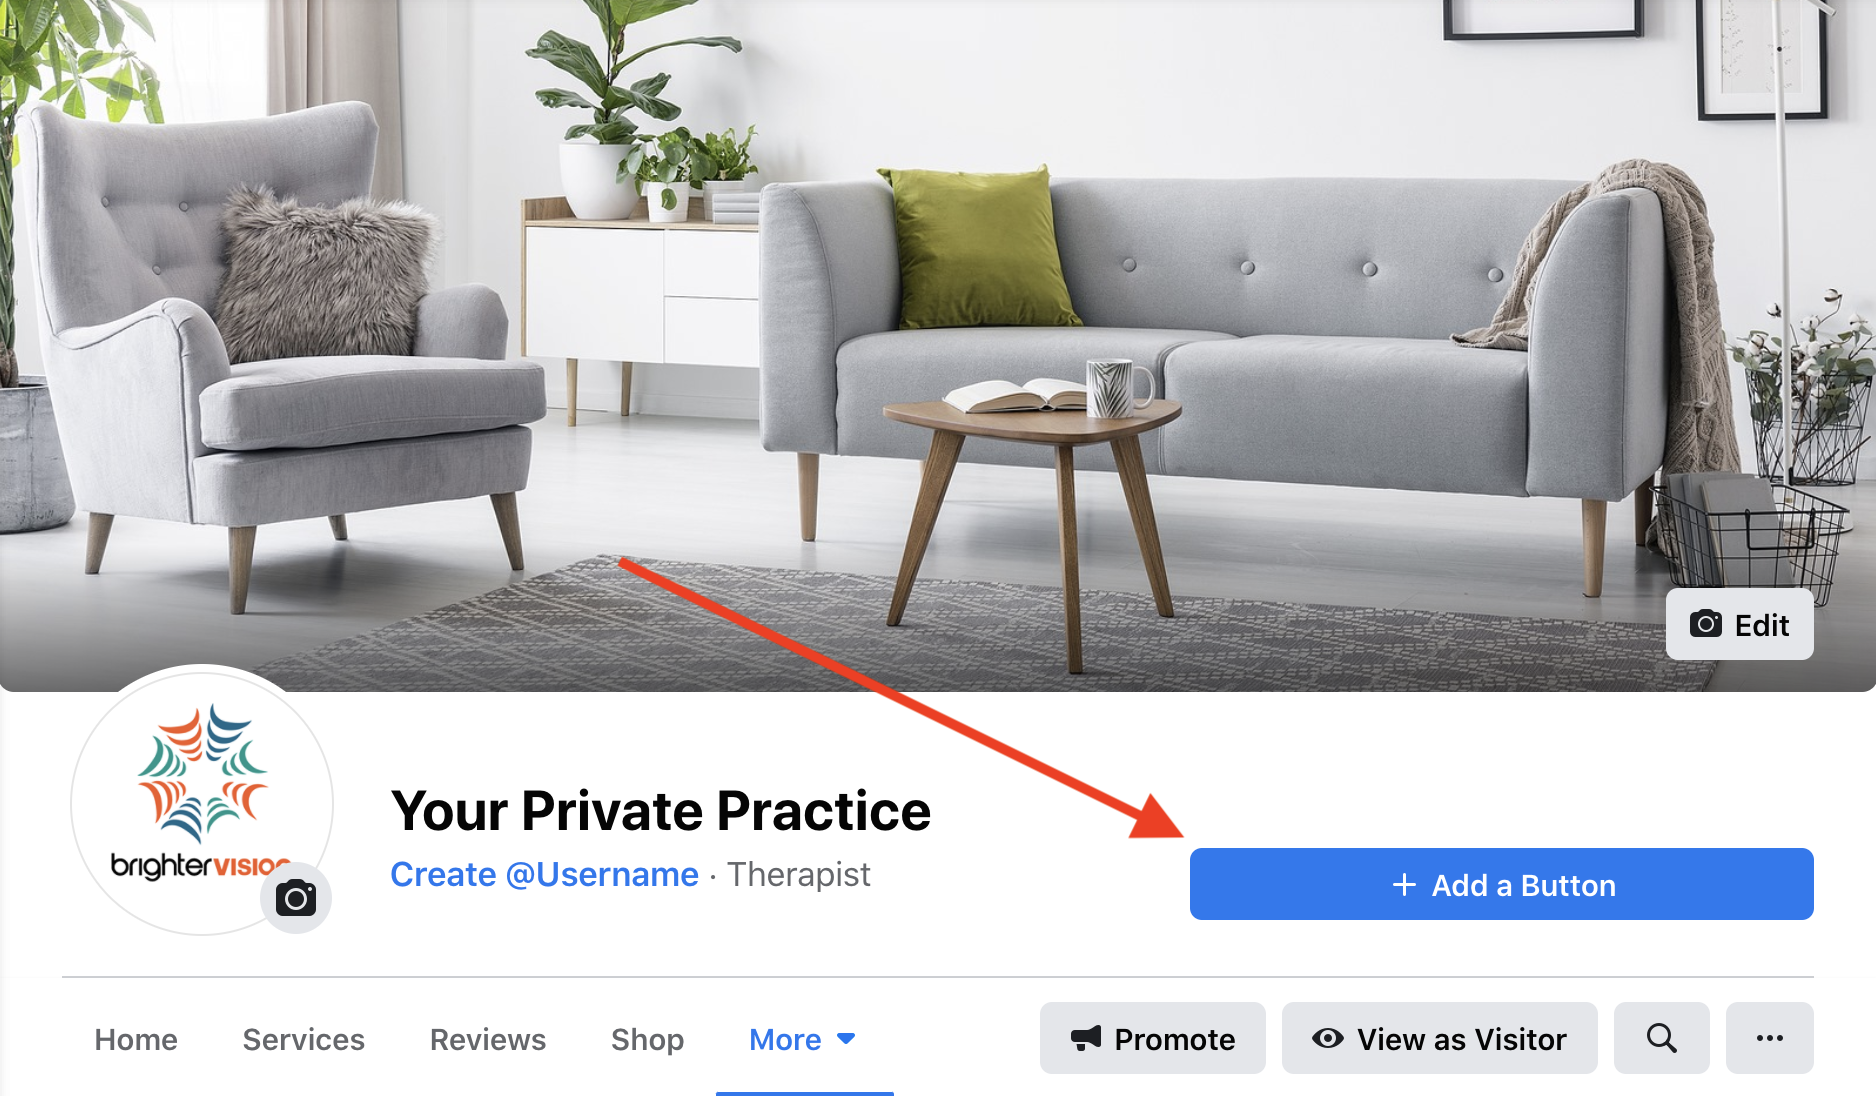 Add a Button to Facebook Business Page | The Therapist’s Guide to Creating an Awesome Facebook Business Page in 2020 | Brighter Vision Web Solutions | Marketing Blog for Therapists